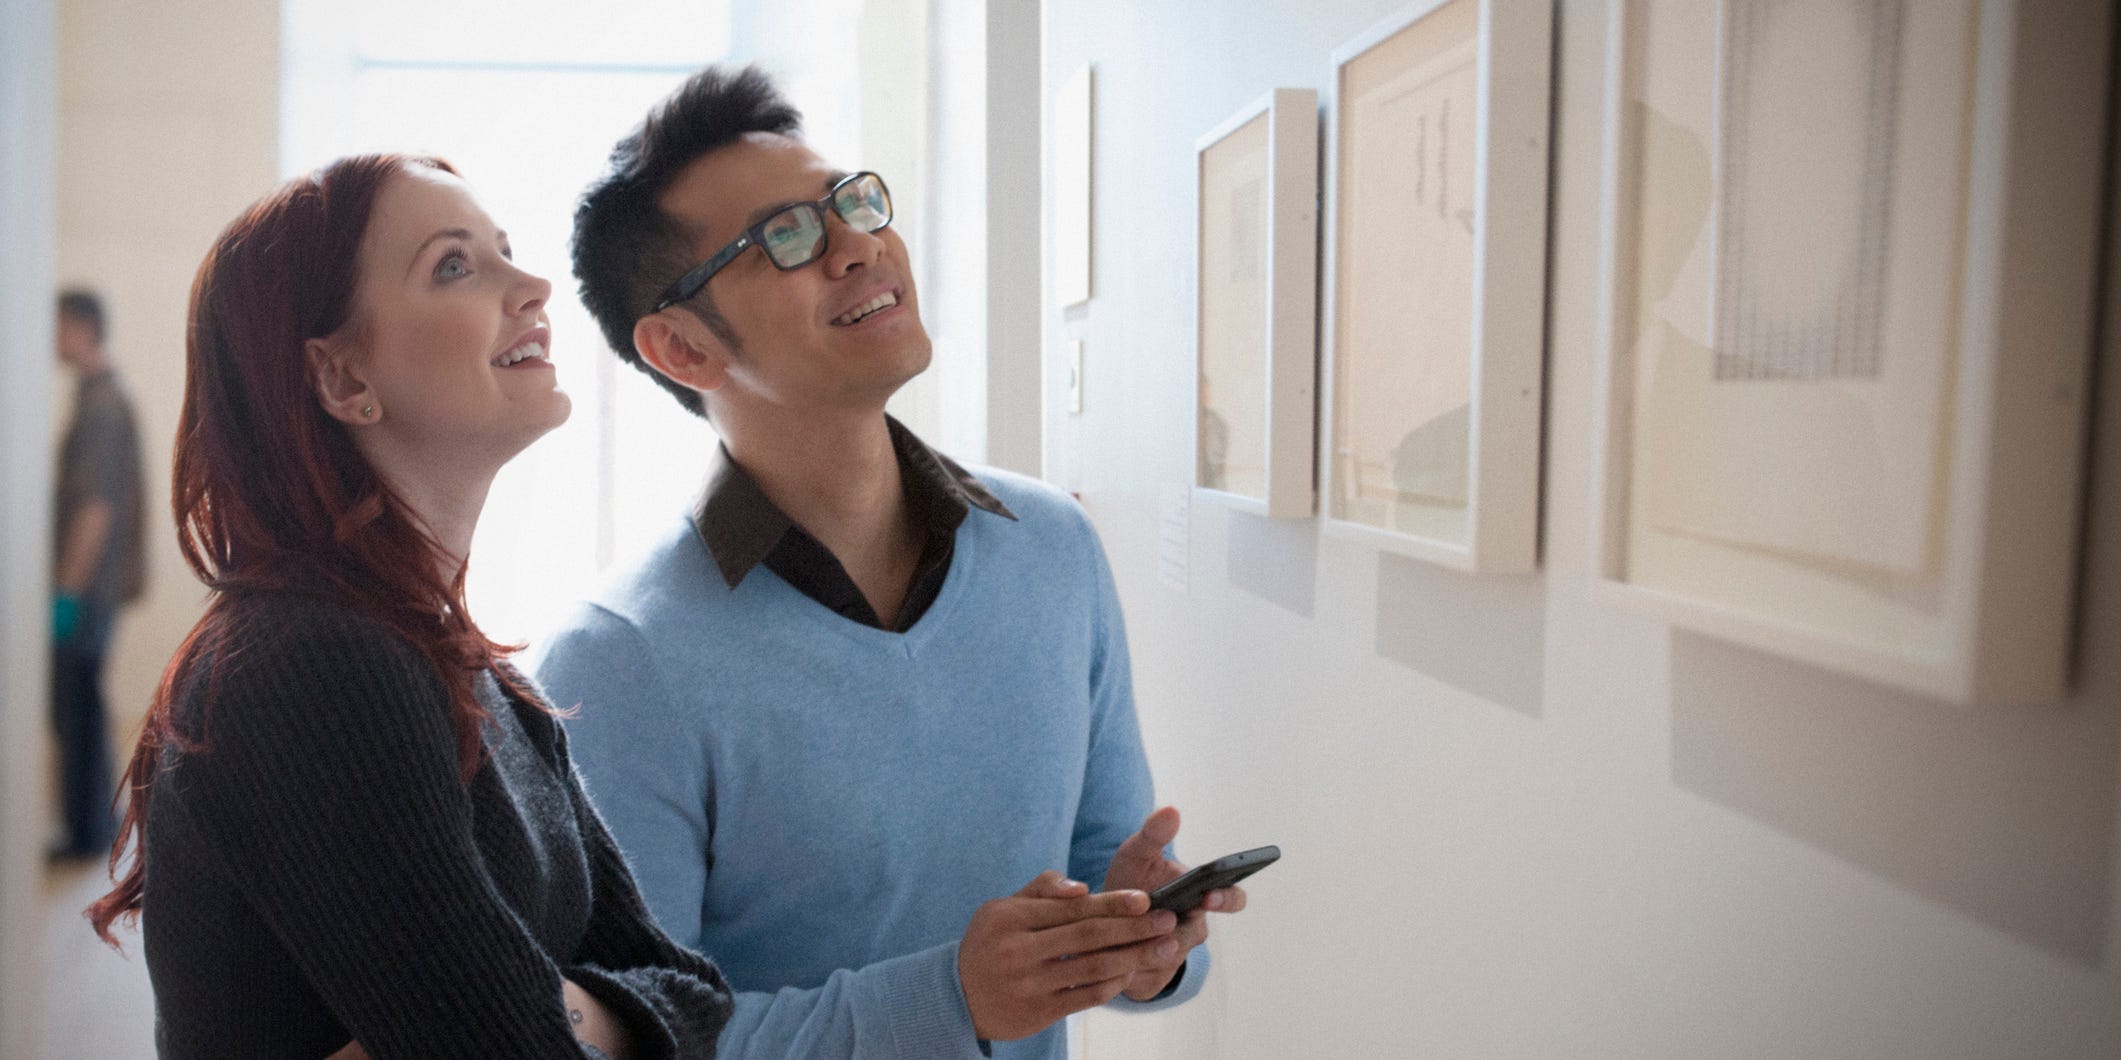 A couple stands in an art museum marveling at some photographs.